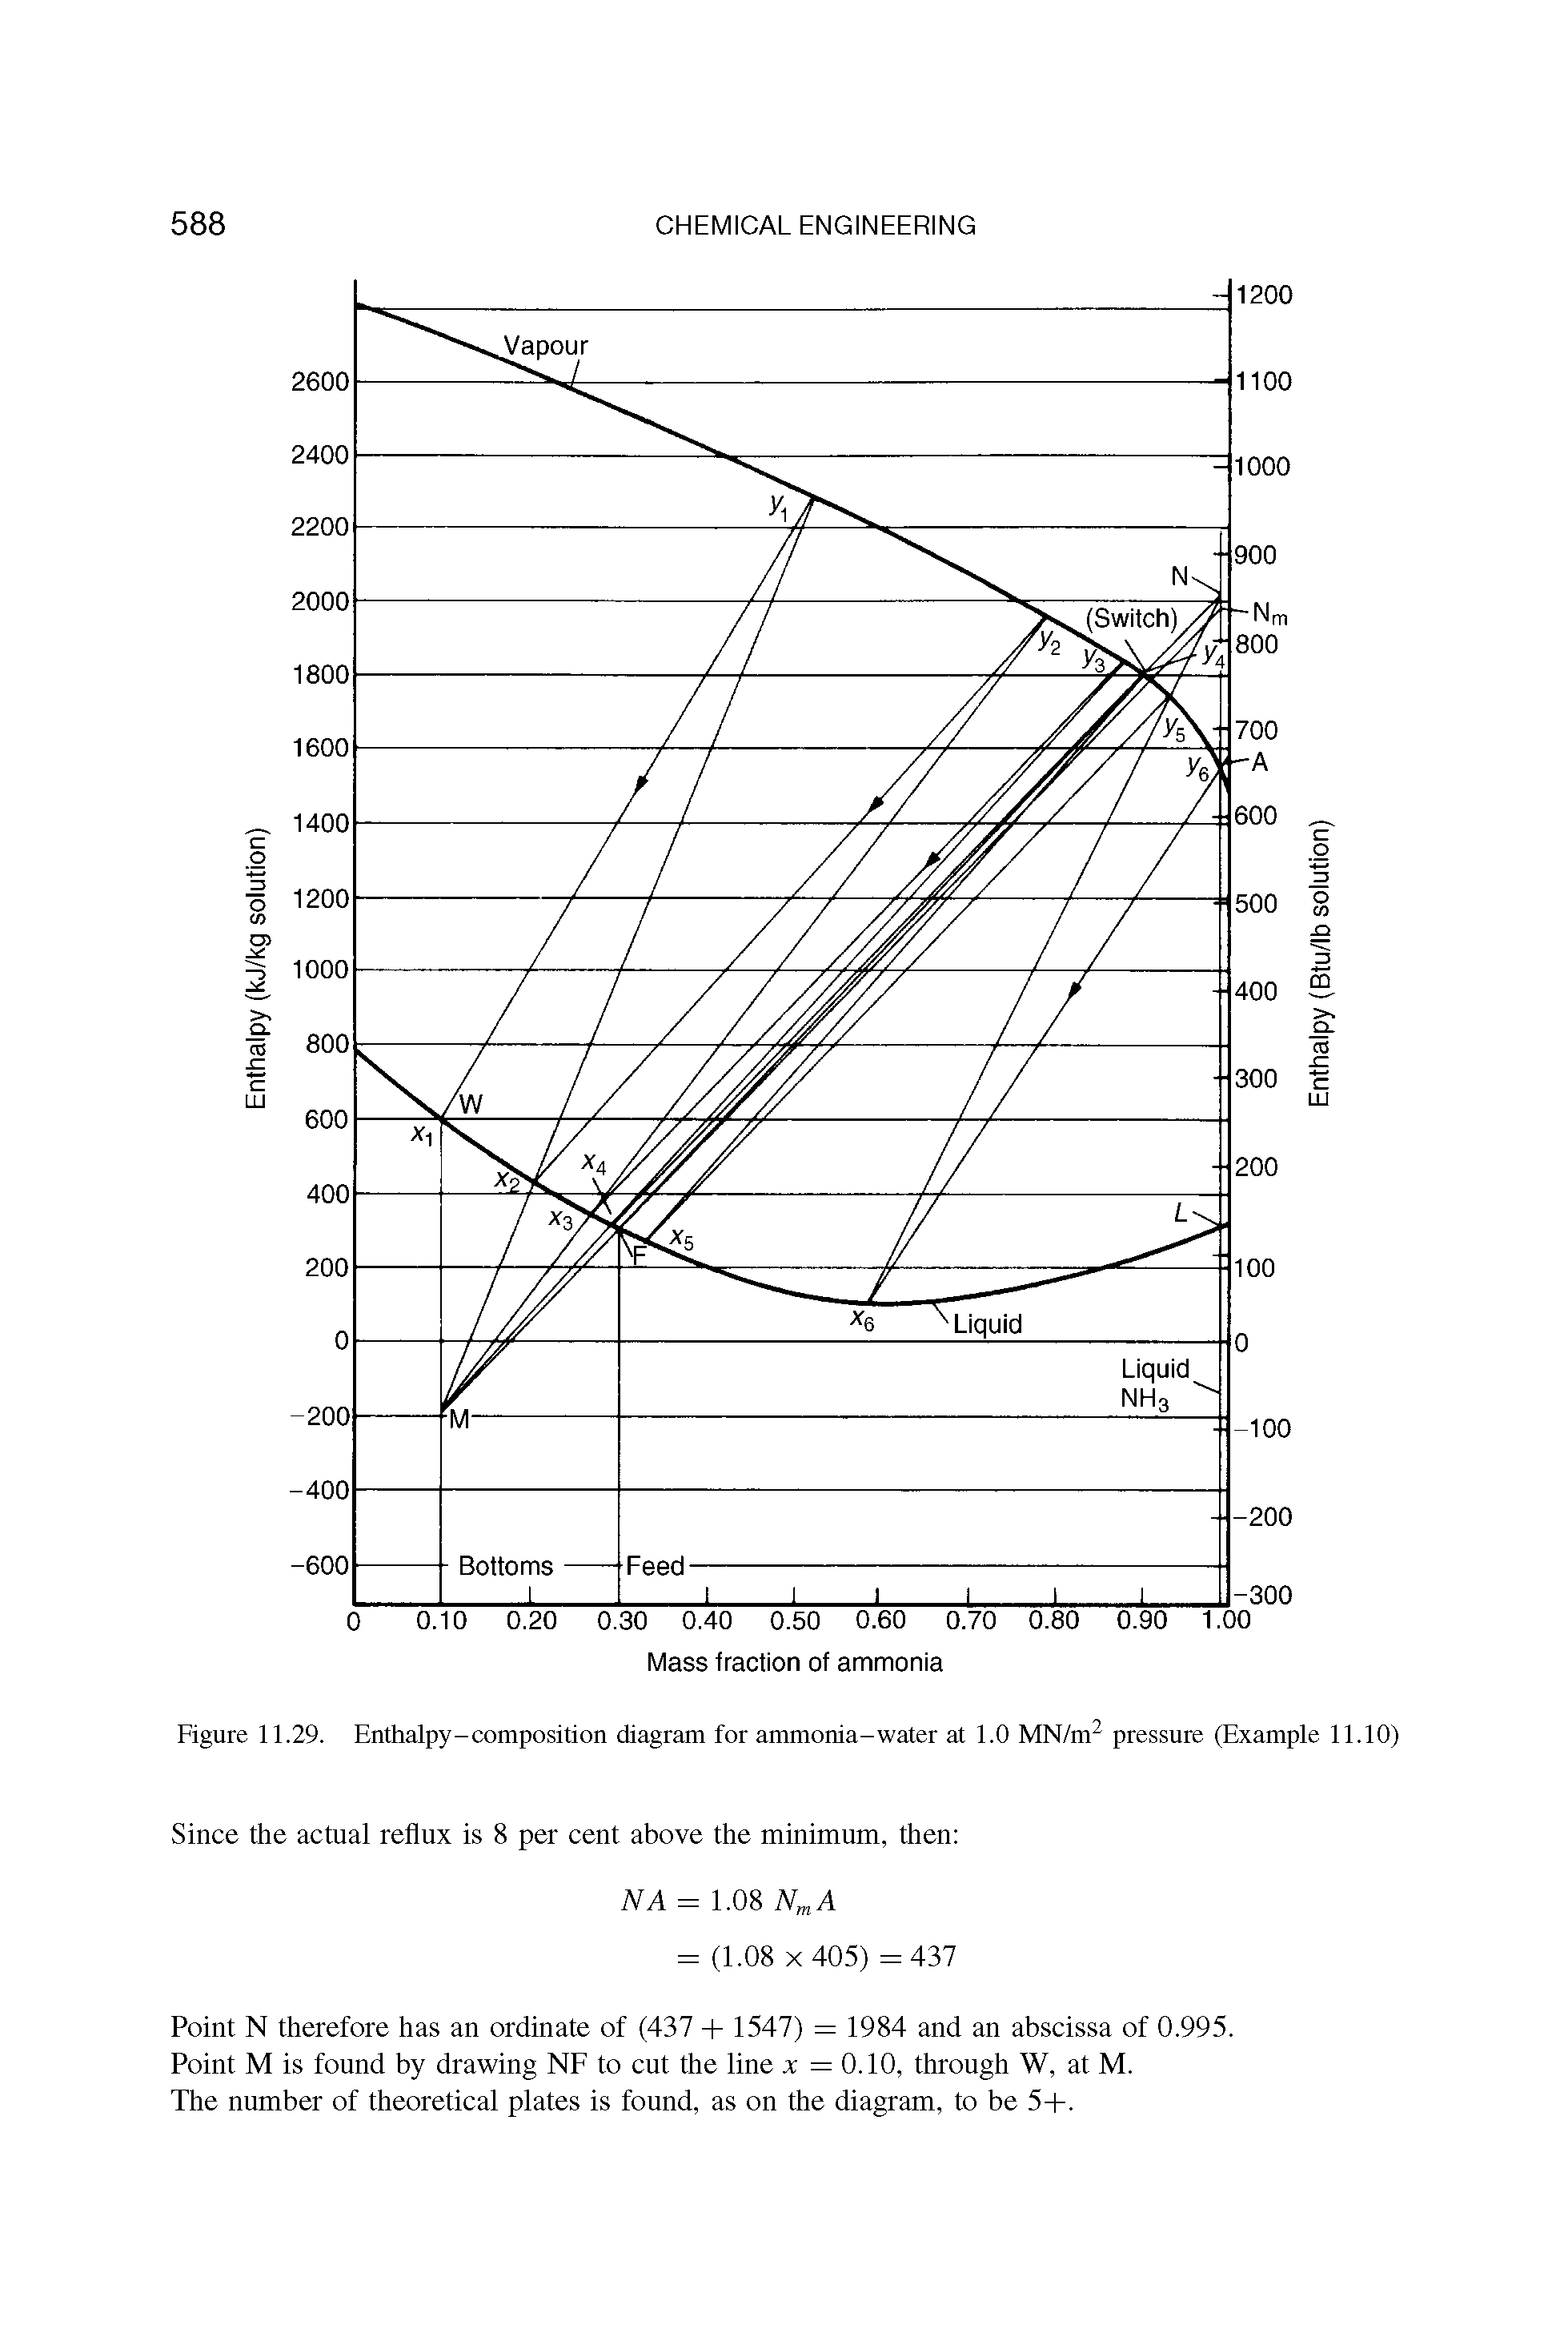 Figure 11.29. Enthalpy-composition diagram for ammonia-water at 1.0 MN/m2 pressure (Example 11.10)...